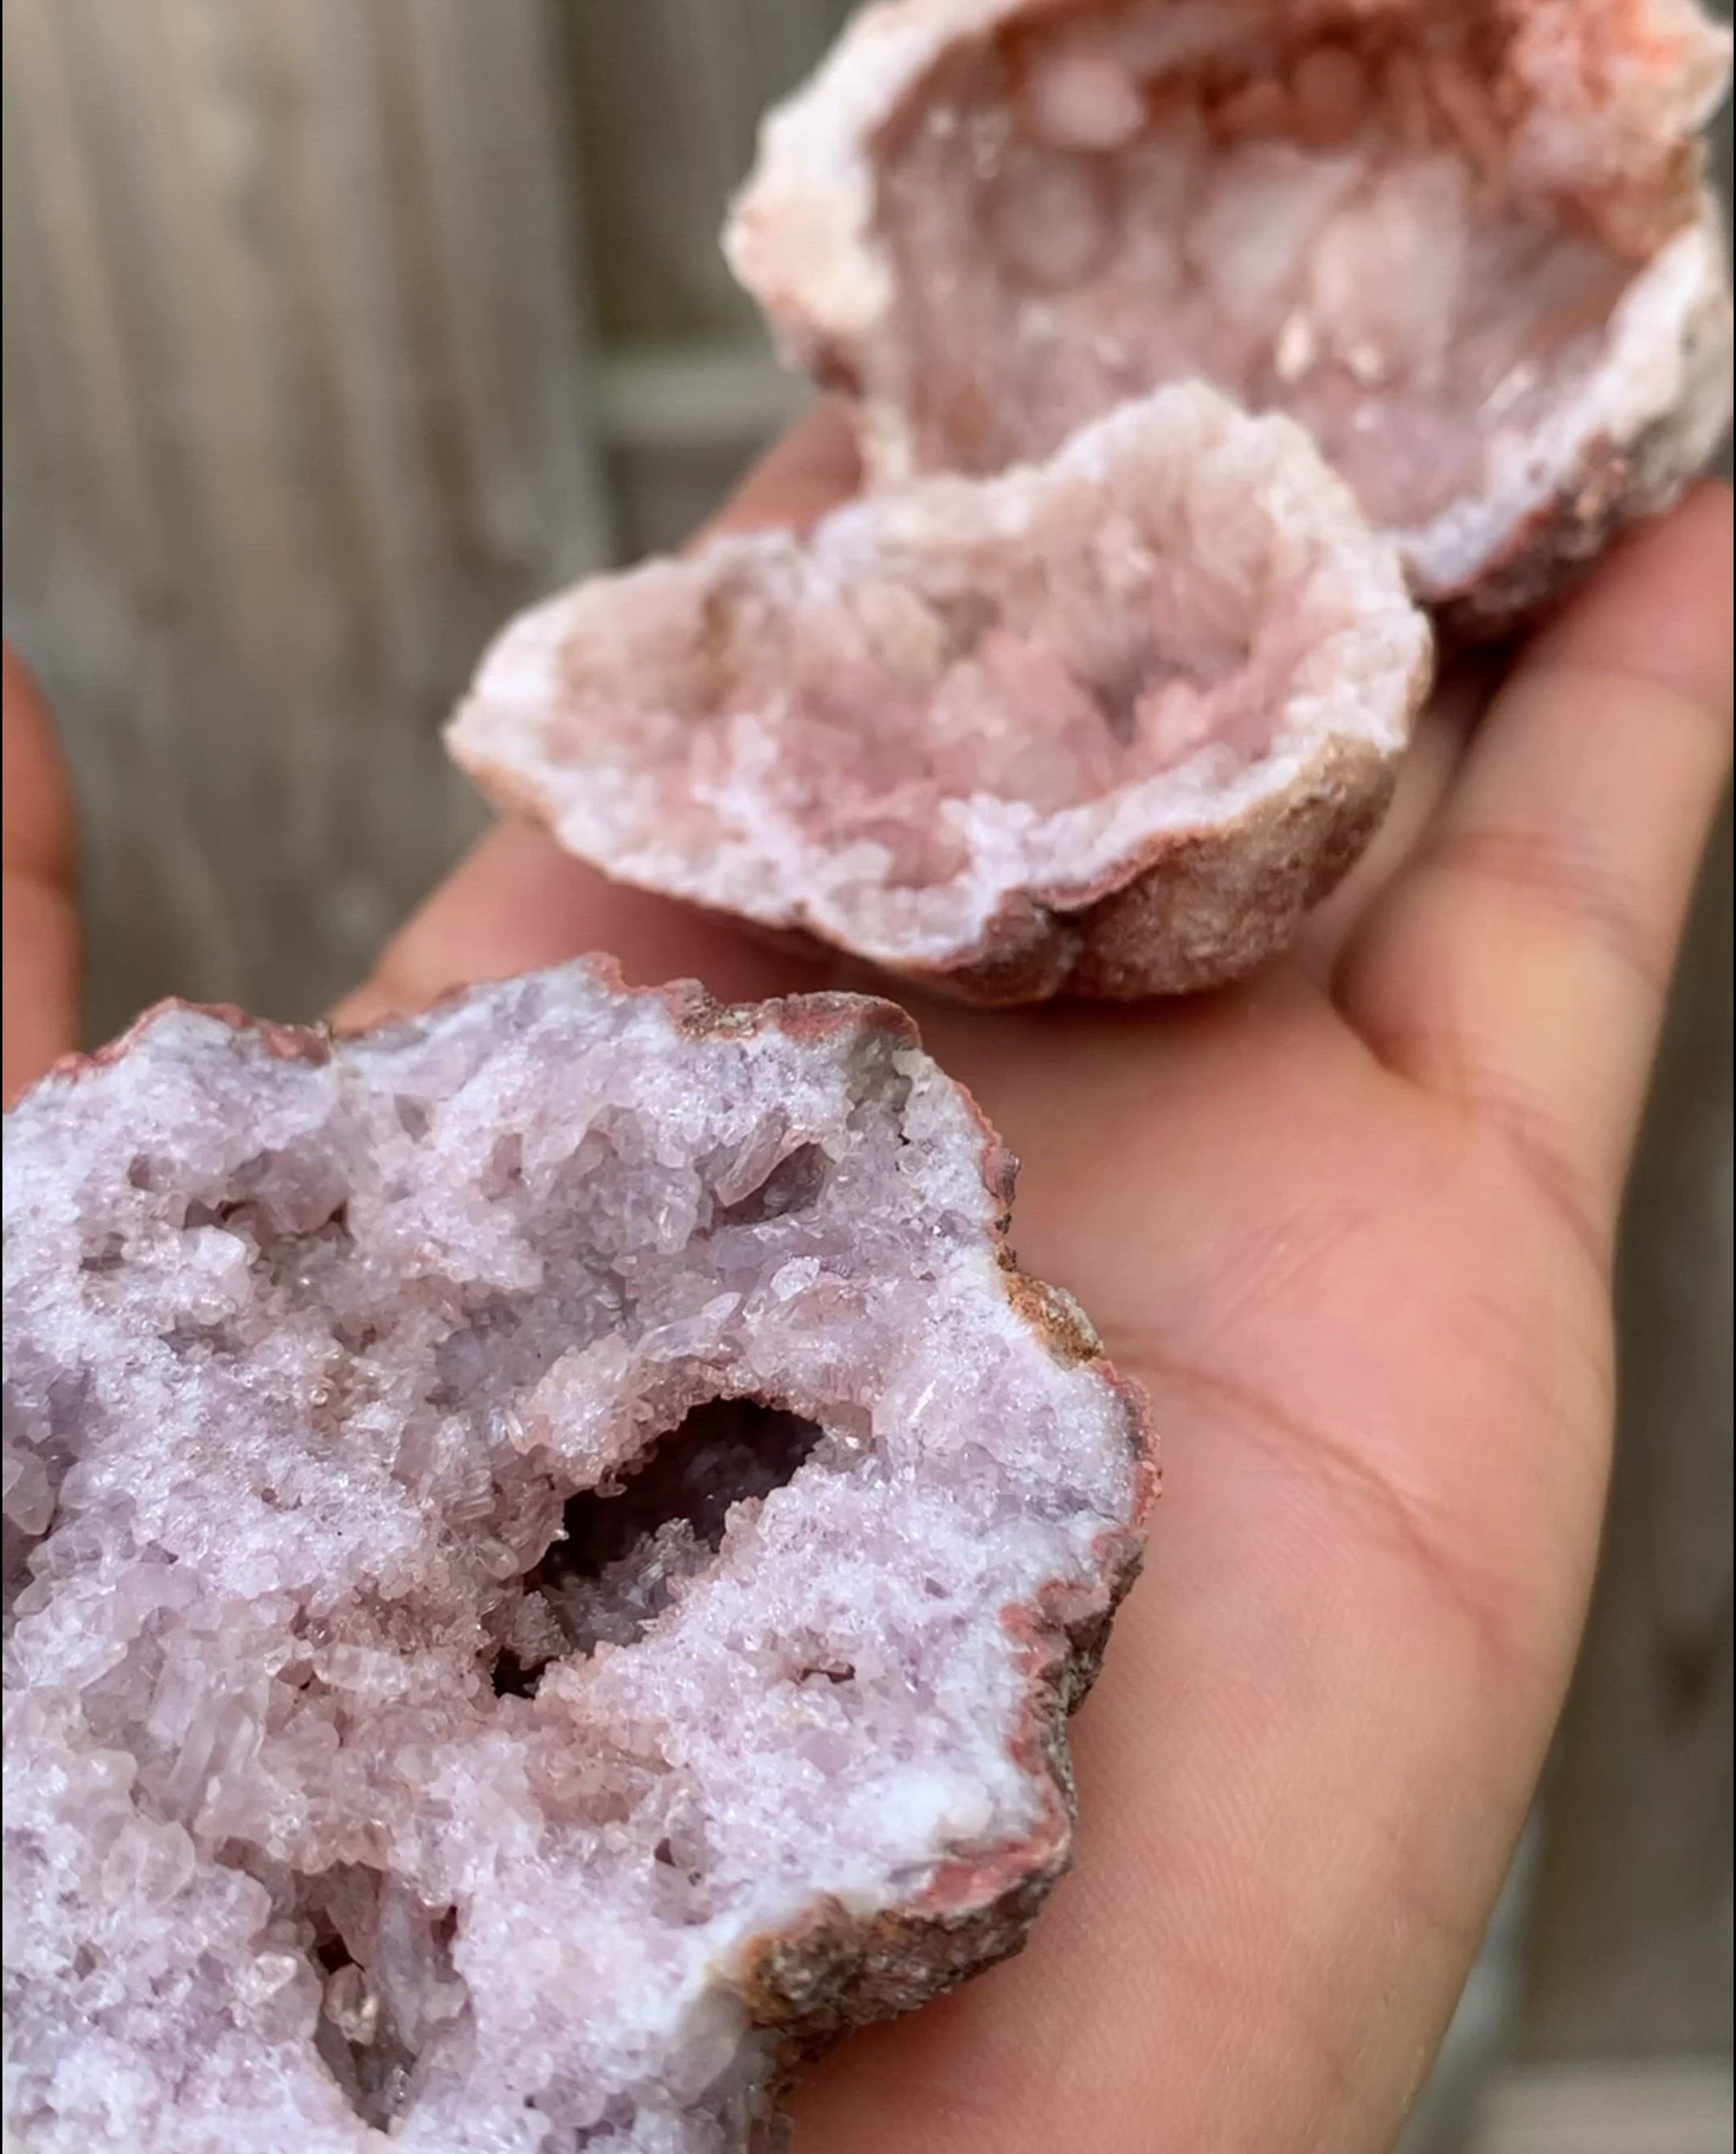 Buy Magic Crystals Pink Amethyst | Rare Pink Amethyst | Pink Amethyst Geode | Pink Amethyst Cluster | Pink Amethyst Crystal | Pink Amethyst Crystal Cluster at Magic Crystals. Natural Amethyst Gemstone for PROTECTION, PEACE, INSPIRATION. Magiccrystals.com offers FREE SHIPPING and the best quality gemstones. 